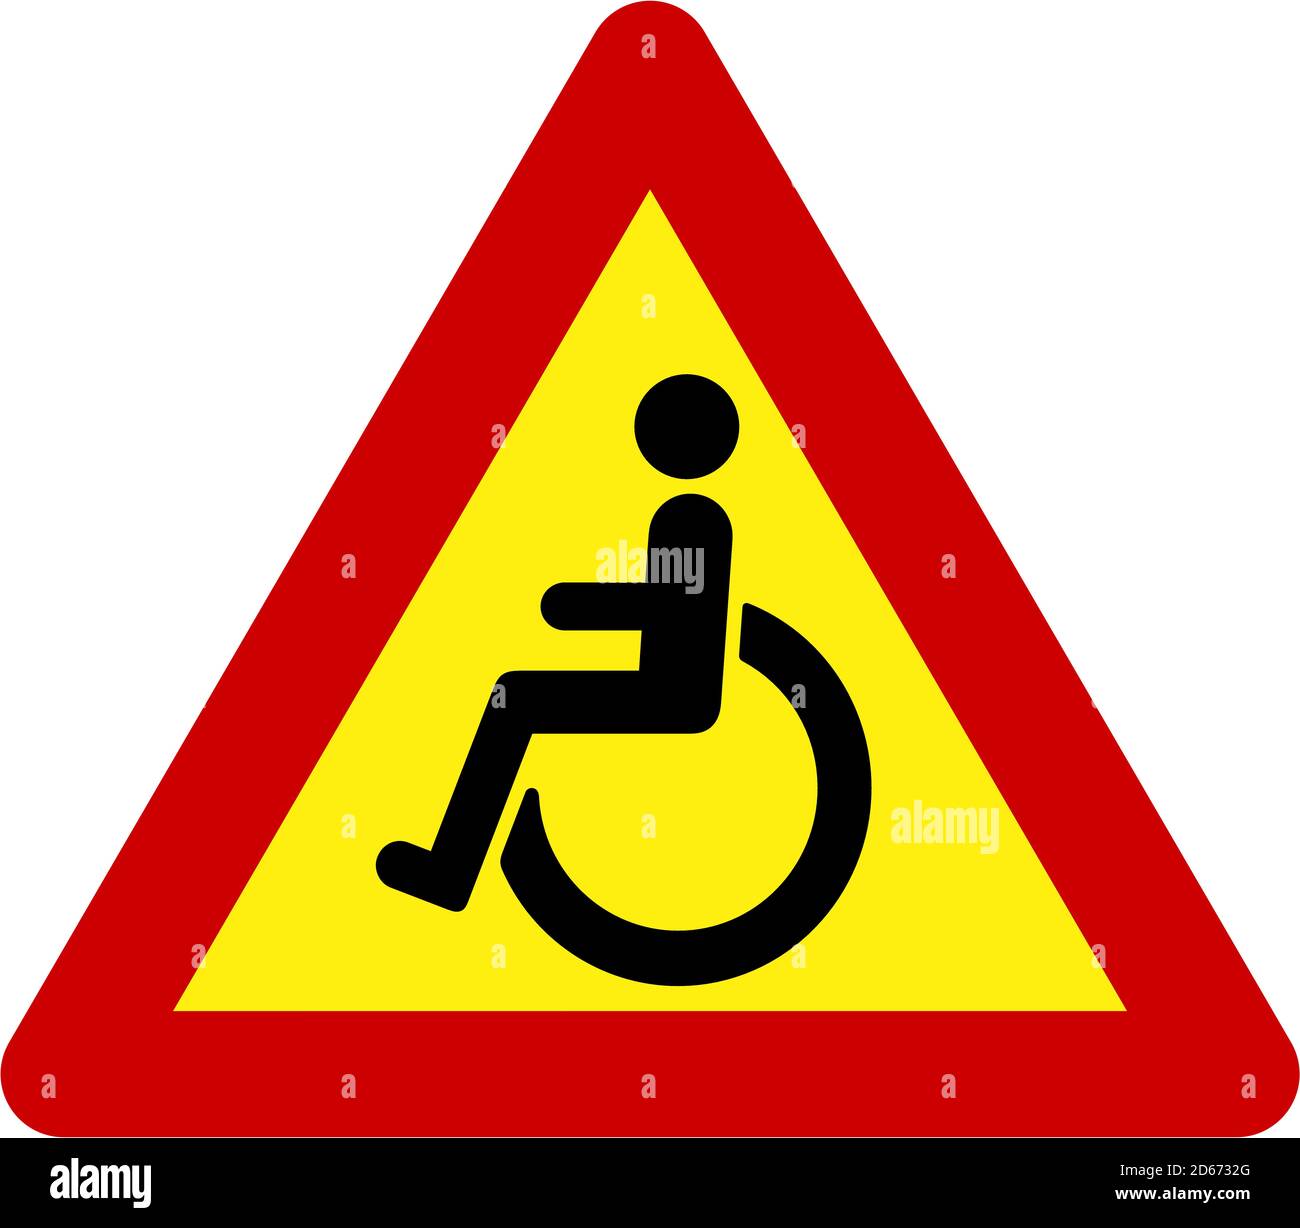 Warning sign with disabled people symbol Stock Photo